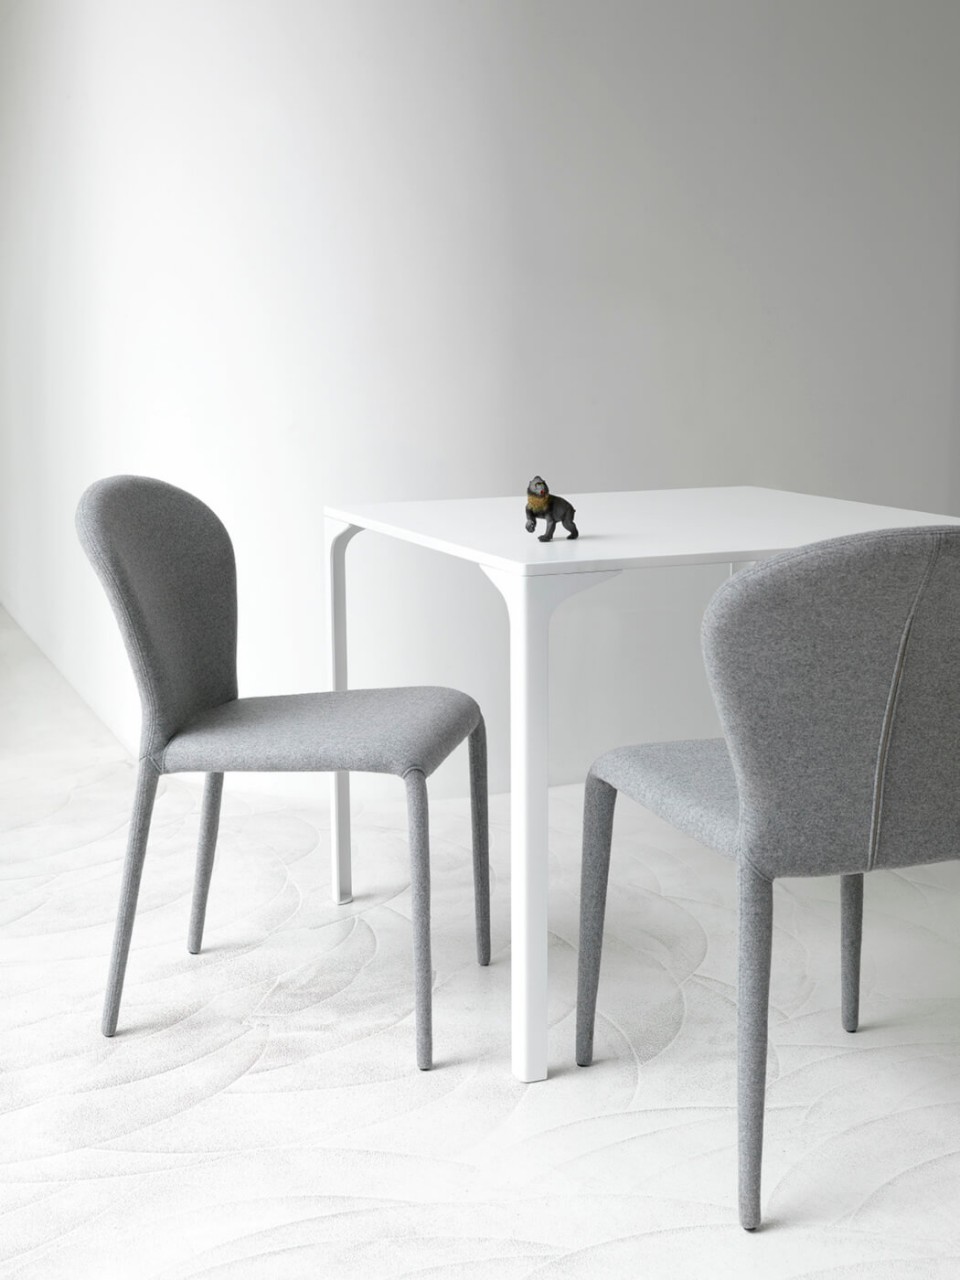 Soffio chair entirely covered in gray fabric